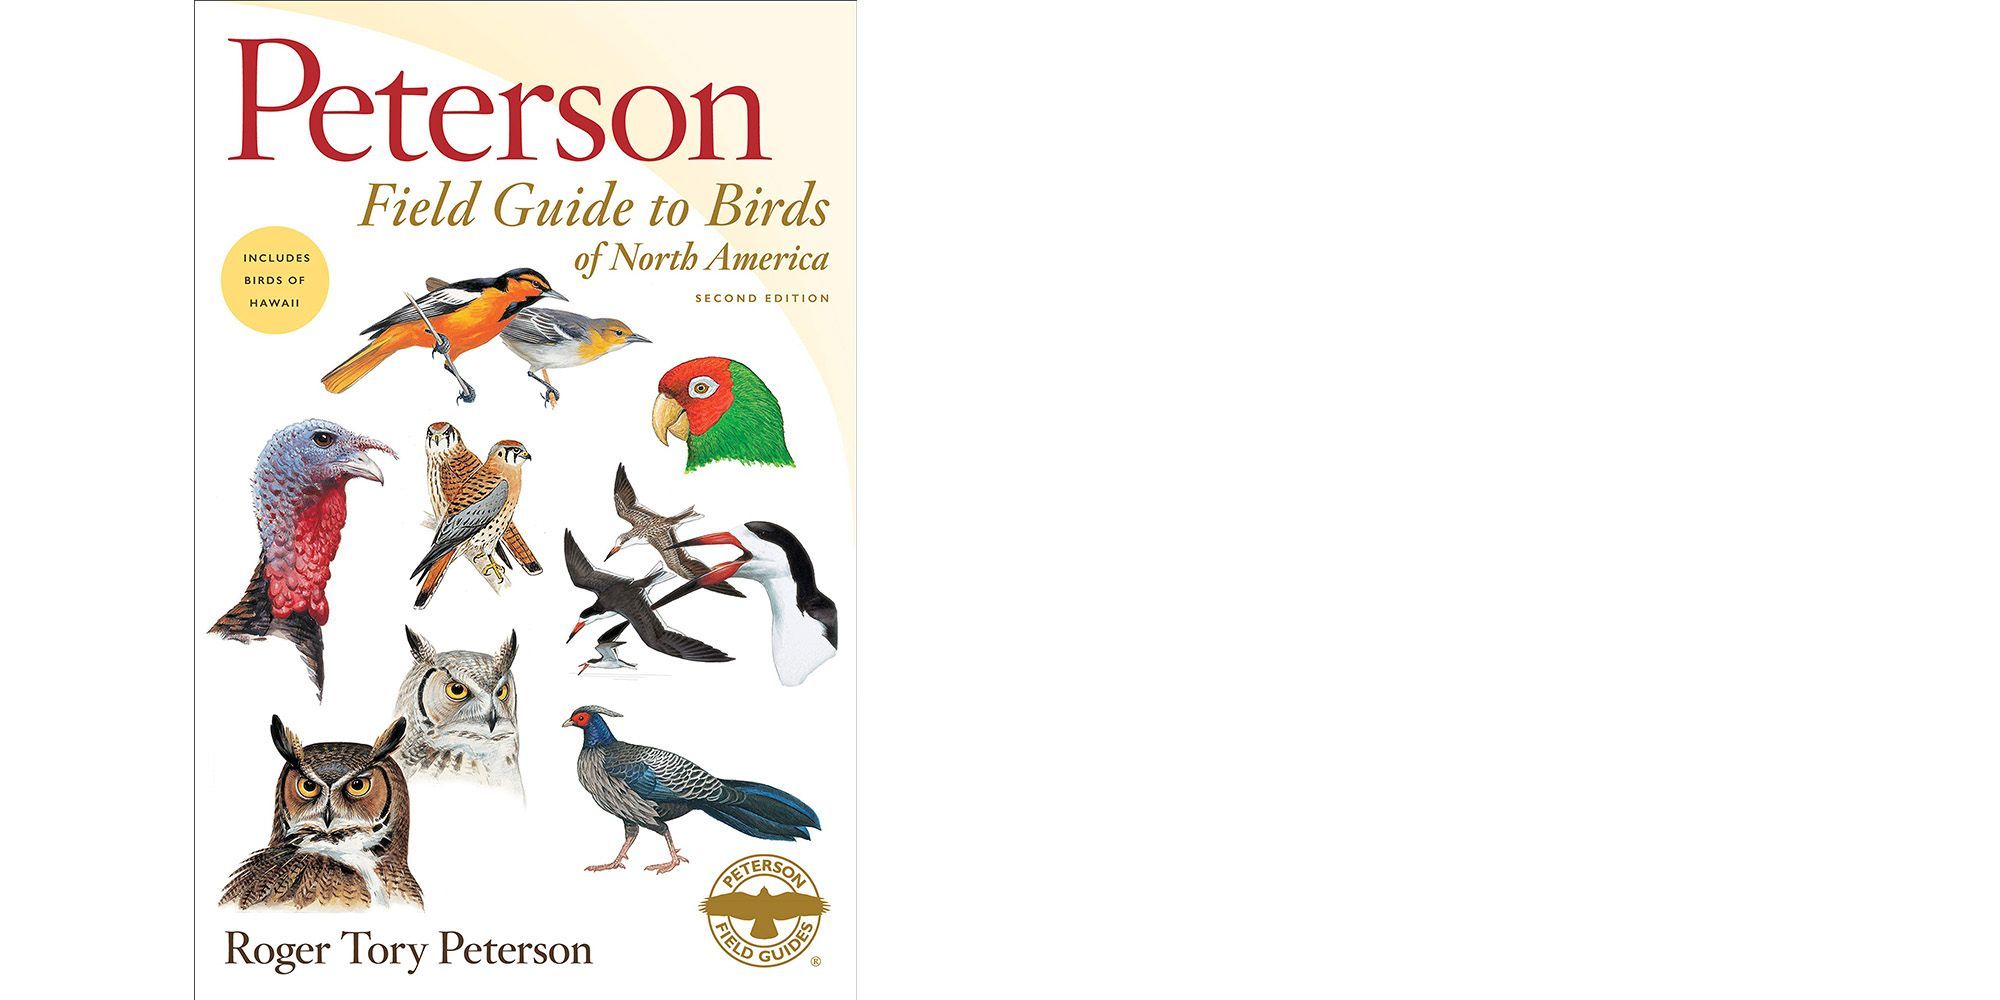 Peterson Field Guide to Birds